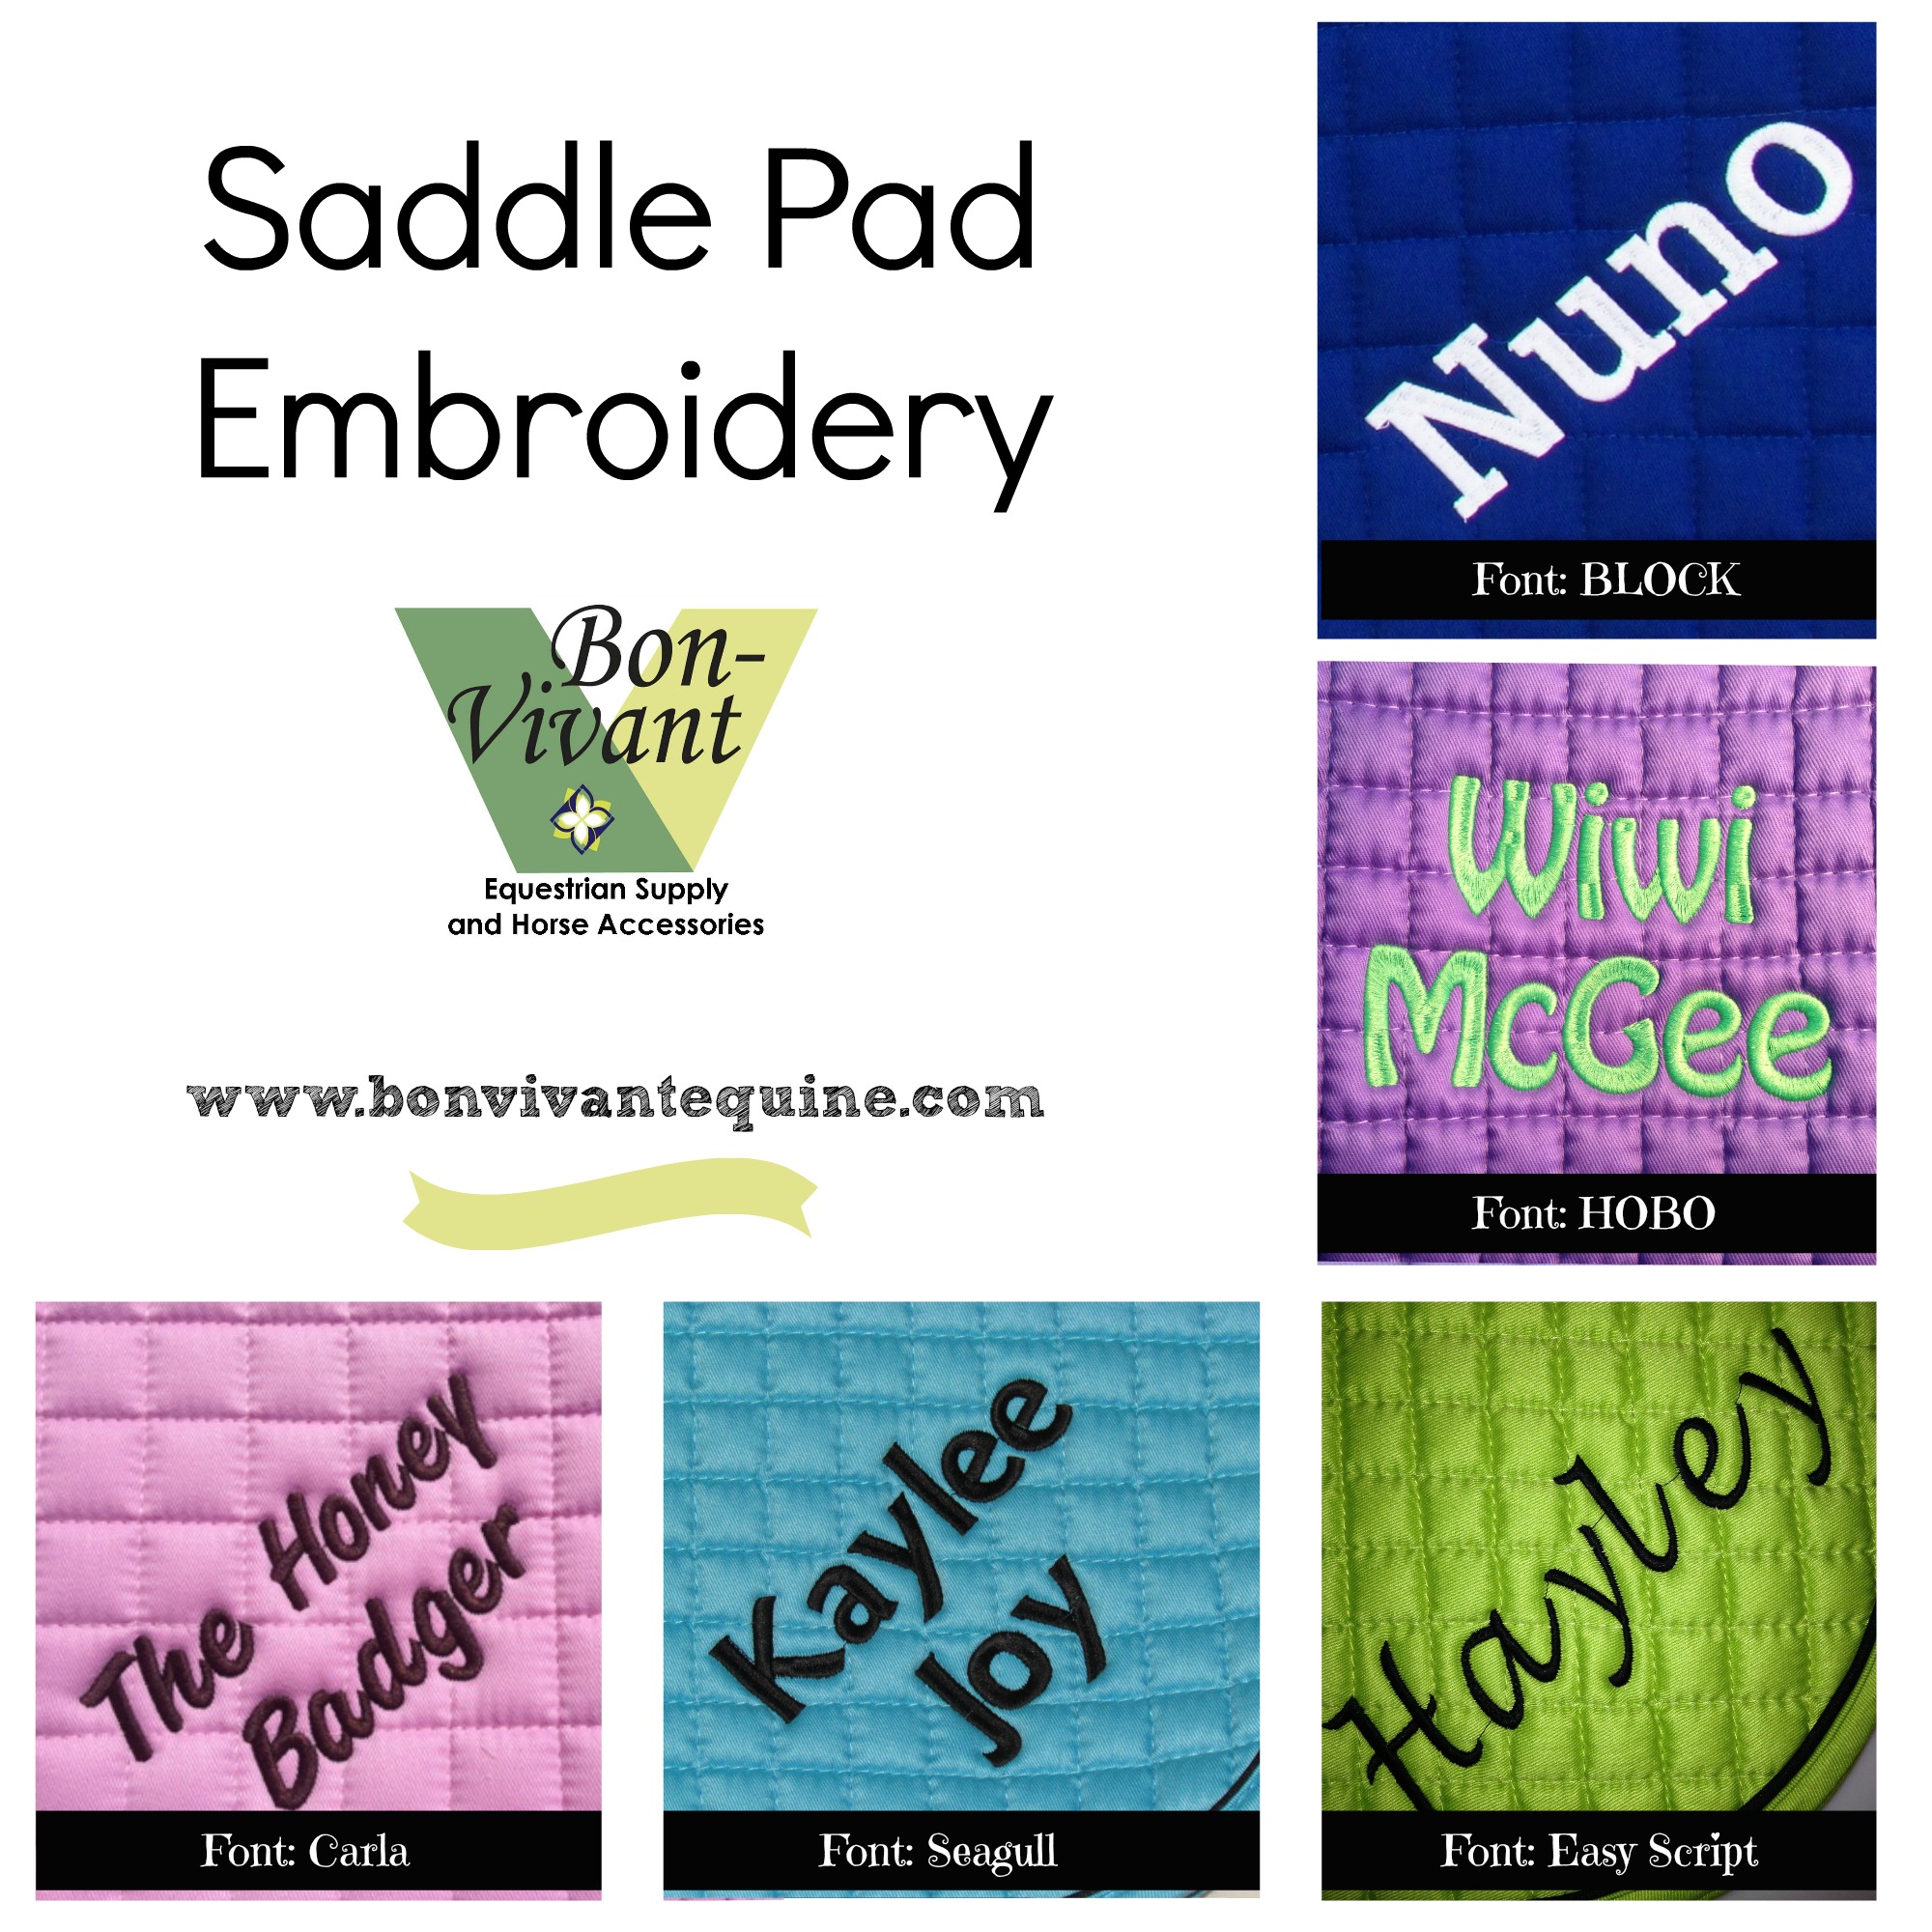 saddle-pad-embroidery-saddle pad monogramming-lots-of-colors-and-styles.jpg